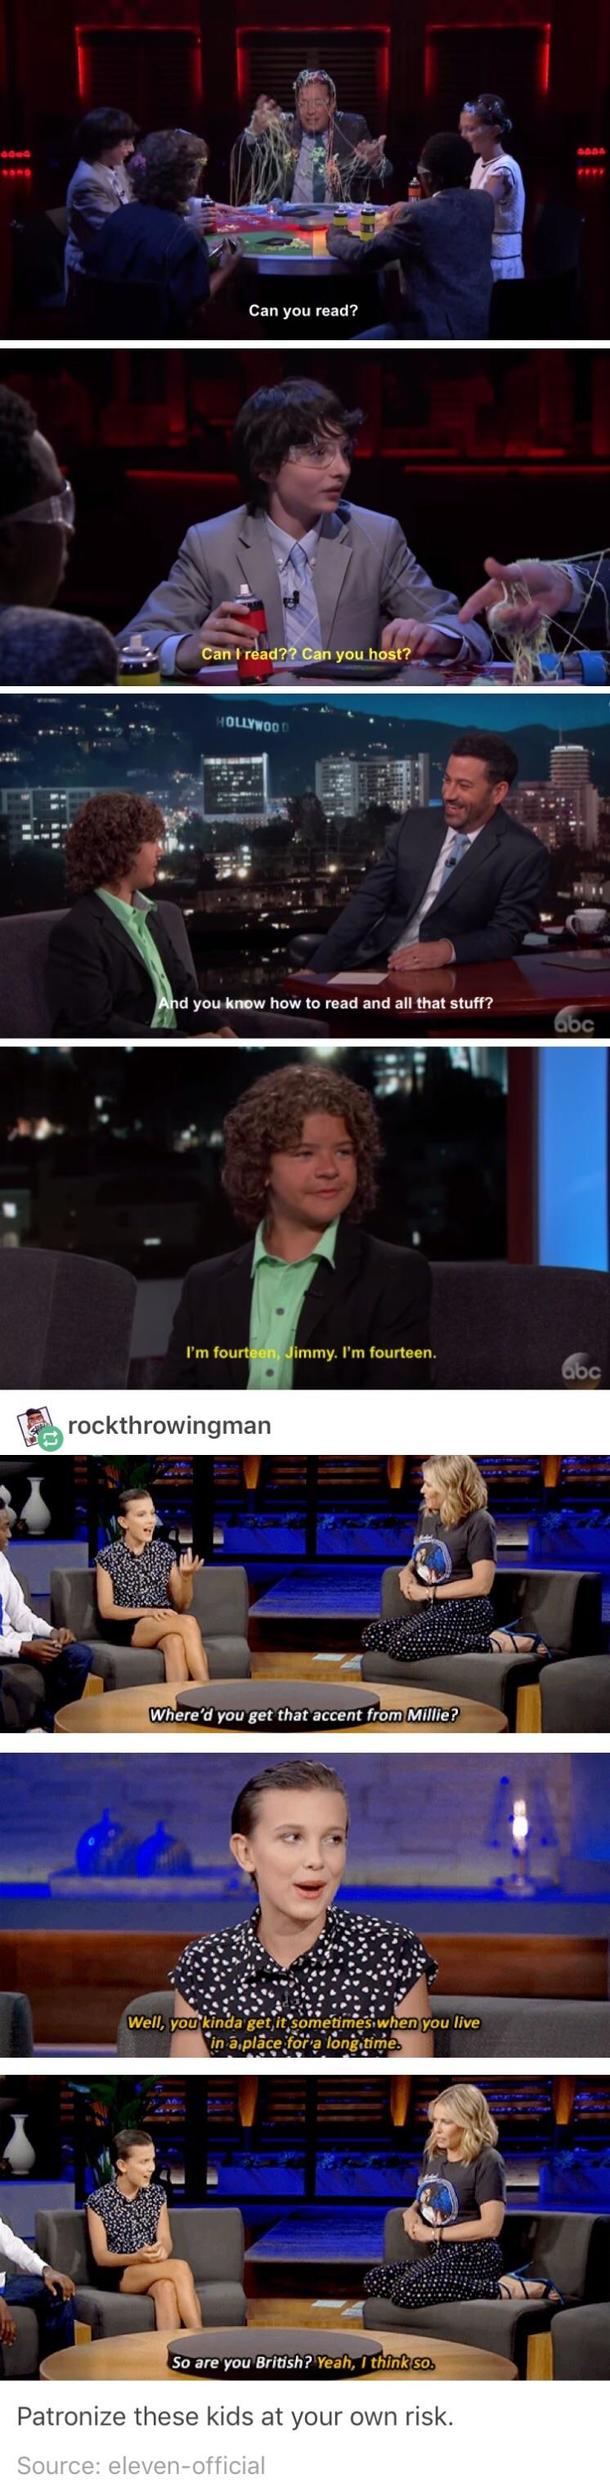 Stranger things kids seem to handle the hosts well